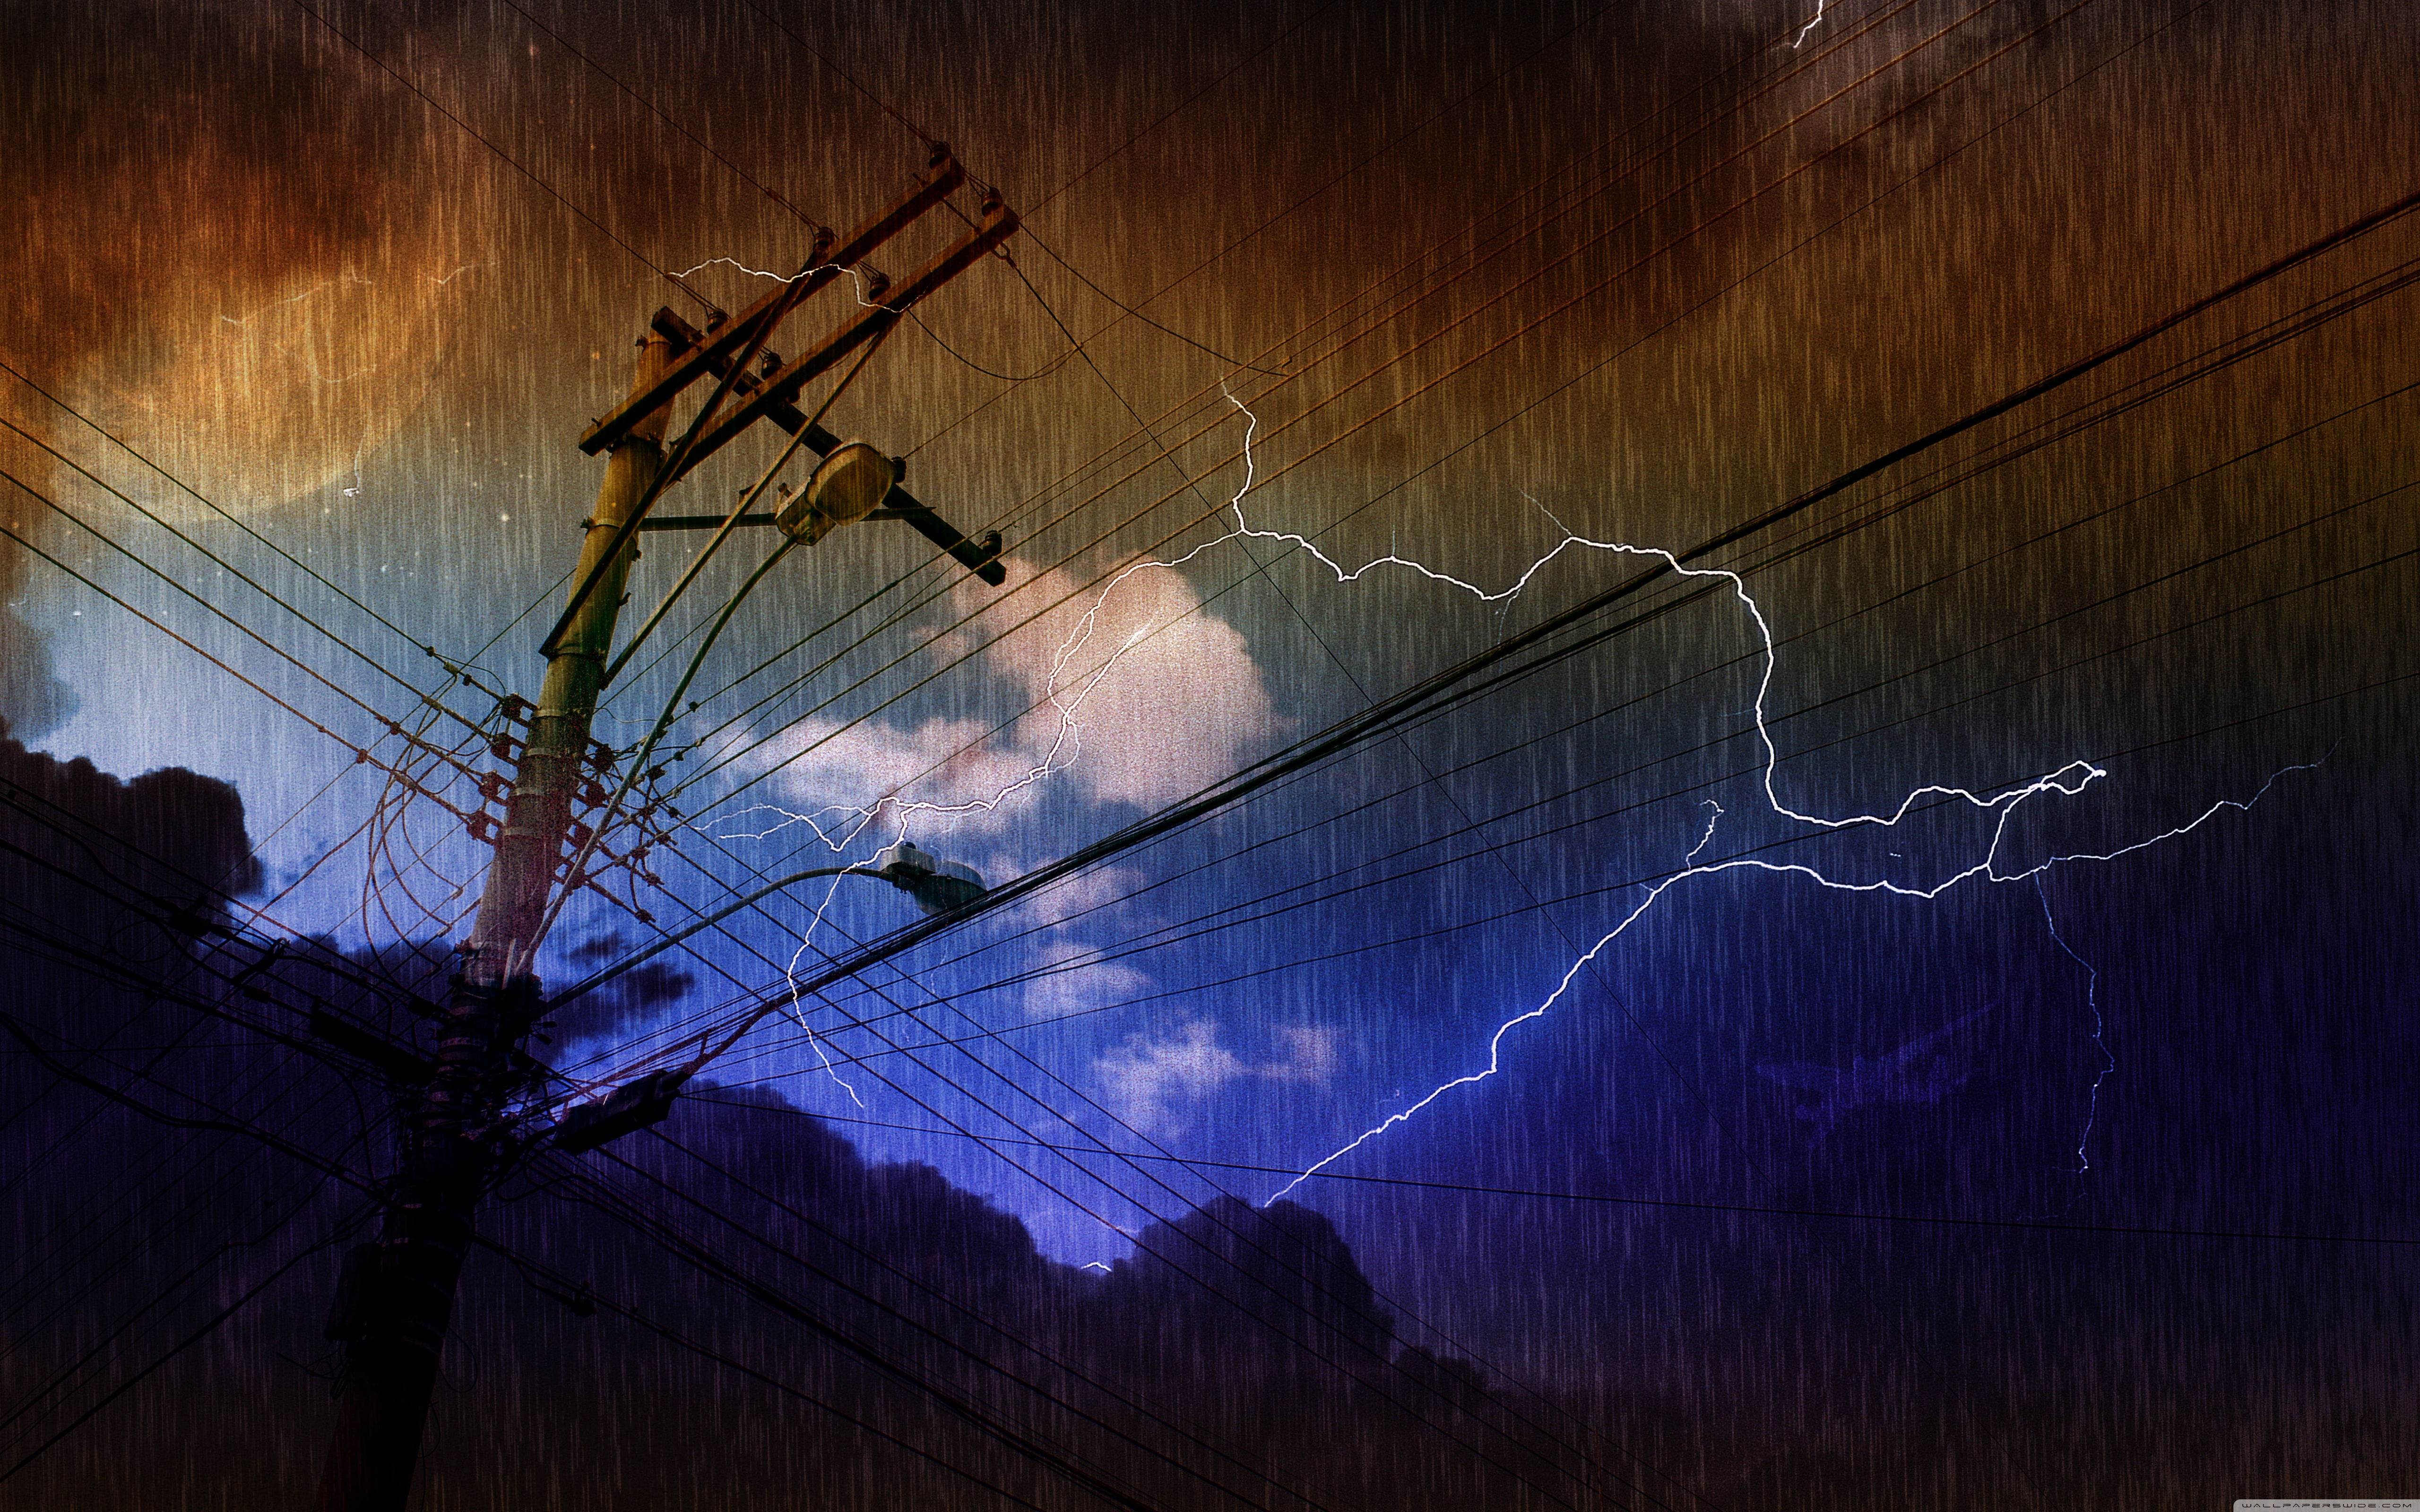 electric wallpaper hd,sky,electricity,overhead power line,cloud,electrical supply